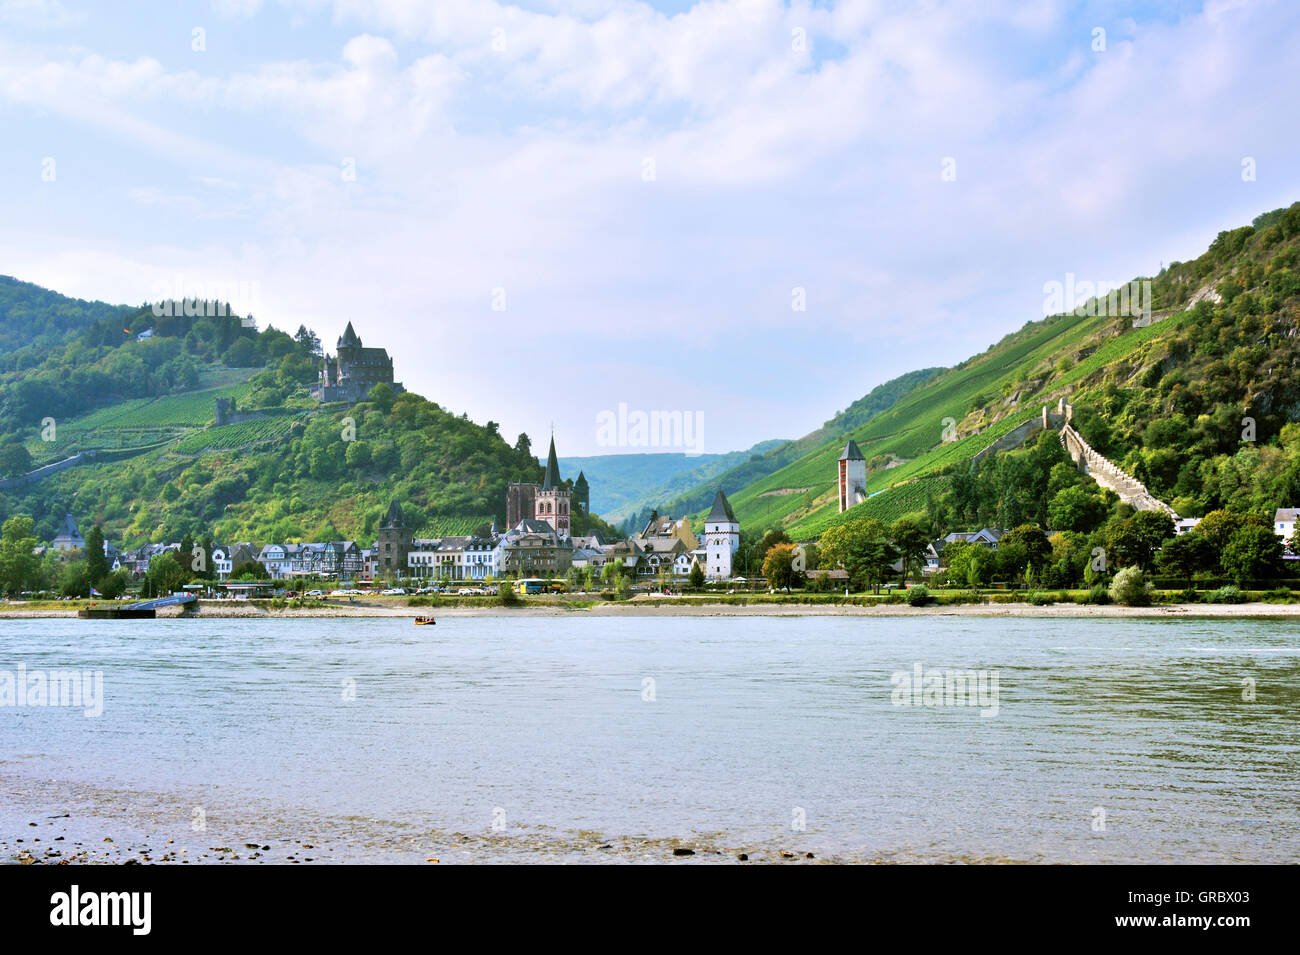 Town Bacharach With Town Wall In The Middle Rhine Valley And Stahleck Castle, Upper Middle Rhine Valley, Germany Stock Photo